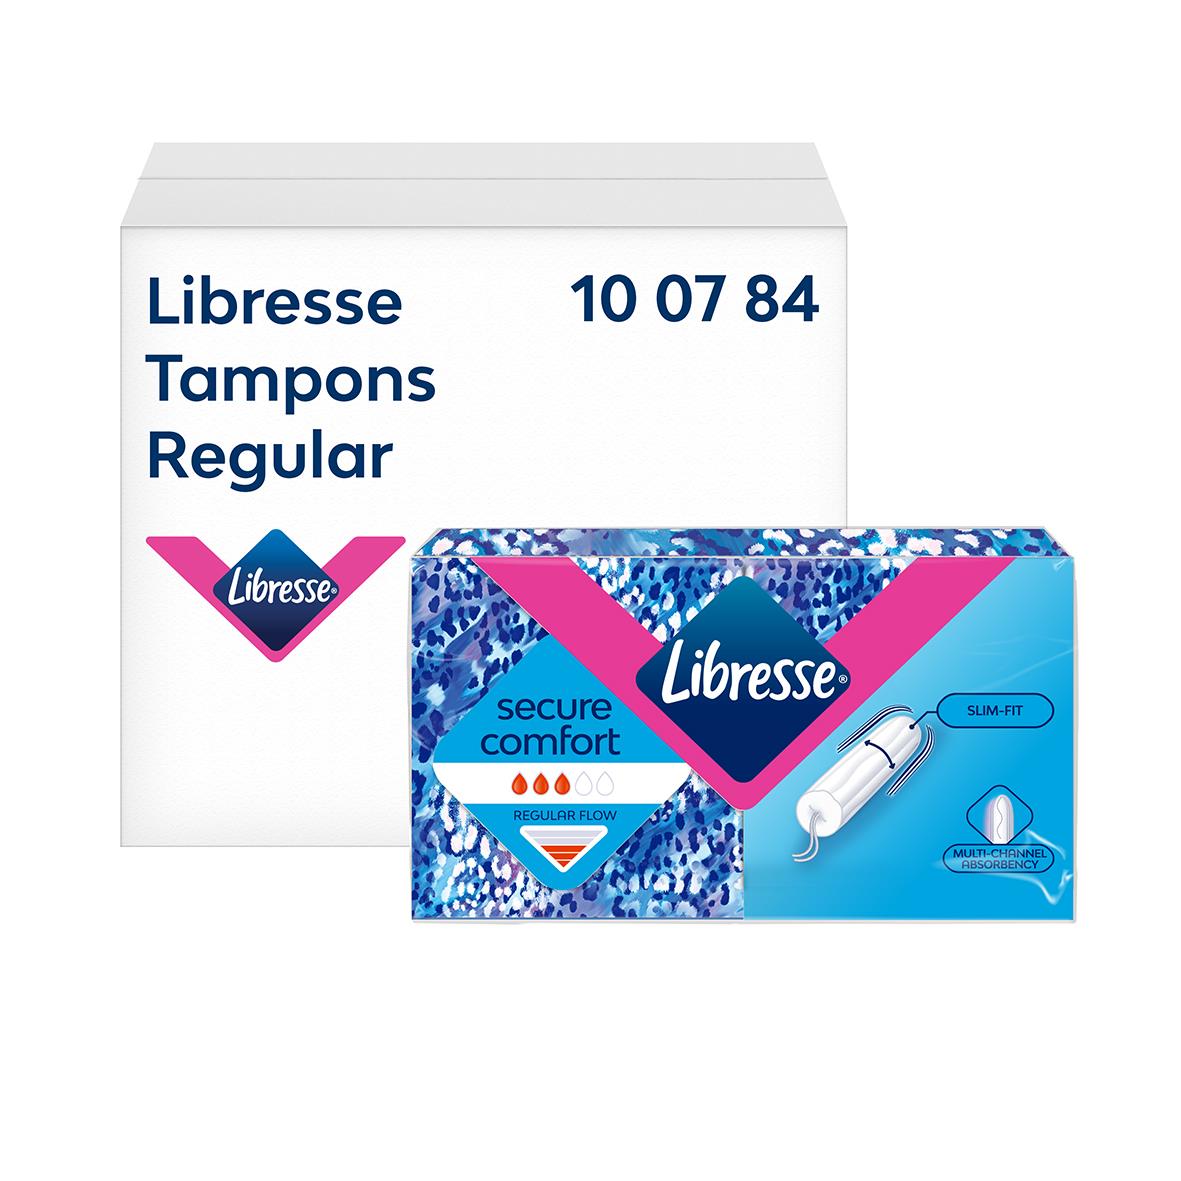 Tampong Libresse Normal Refill 51021179_1